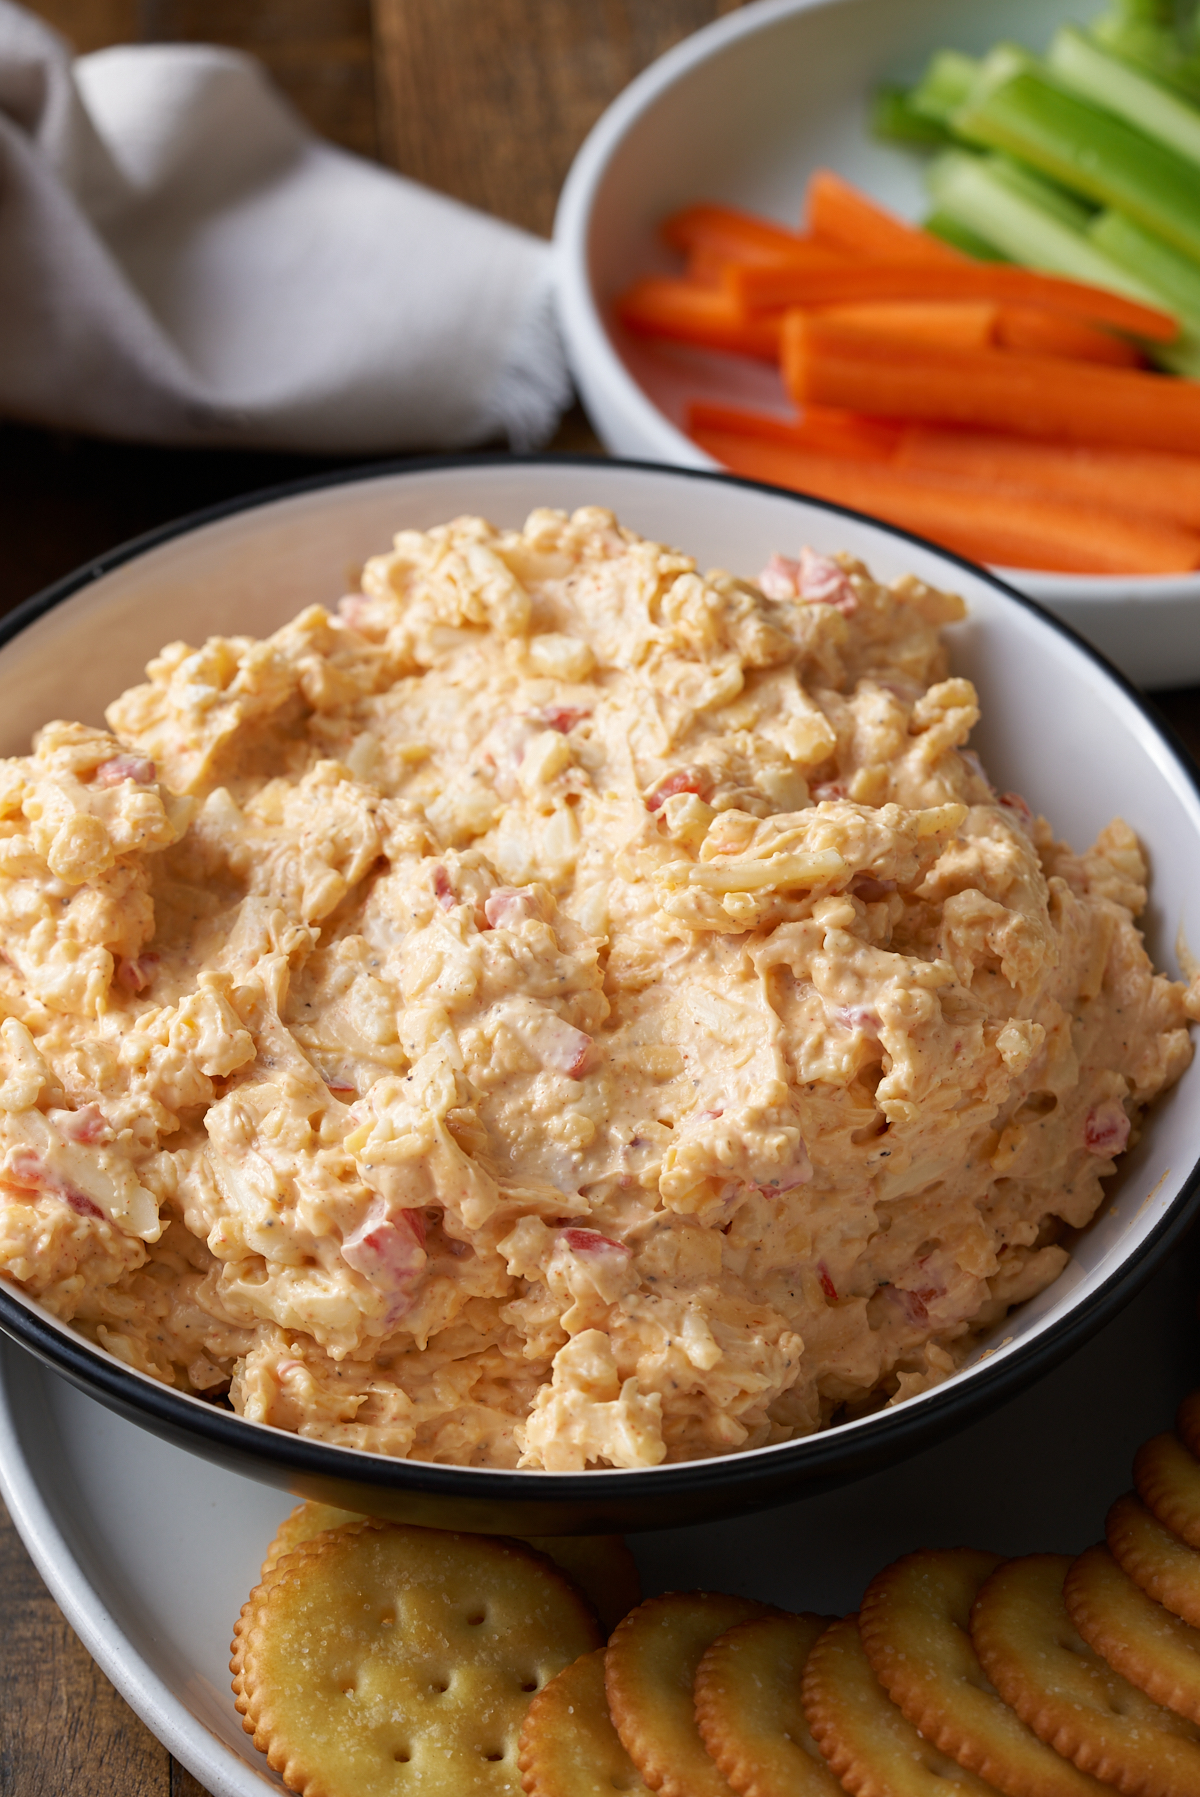 pimento cheese in white bowl with crackers on side and vegetables in background